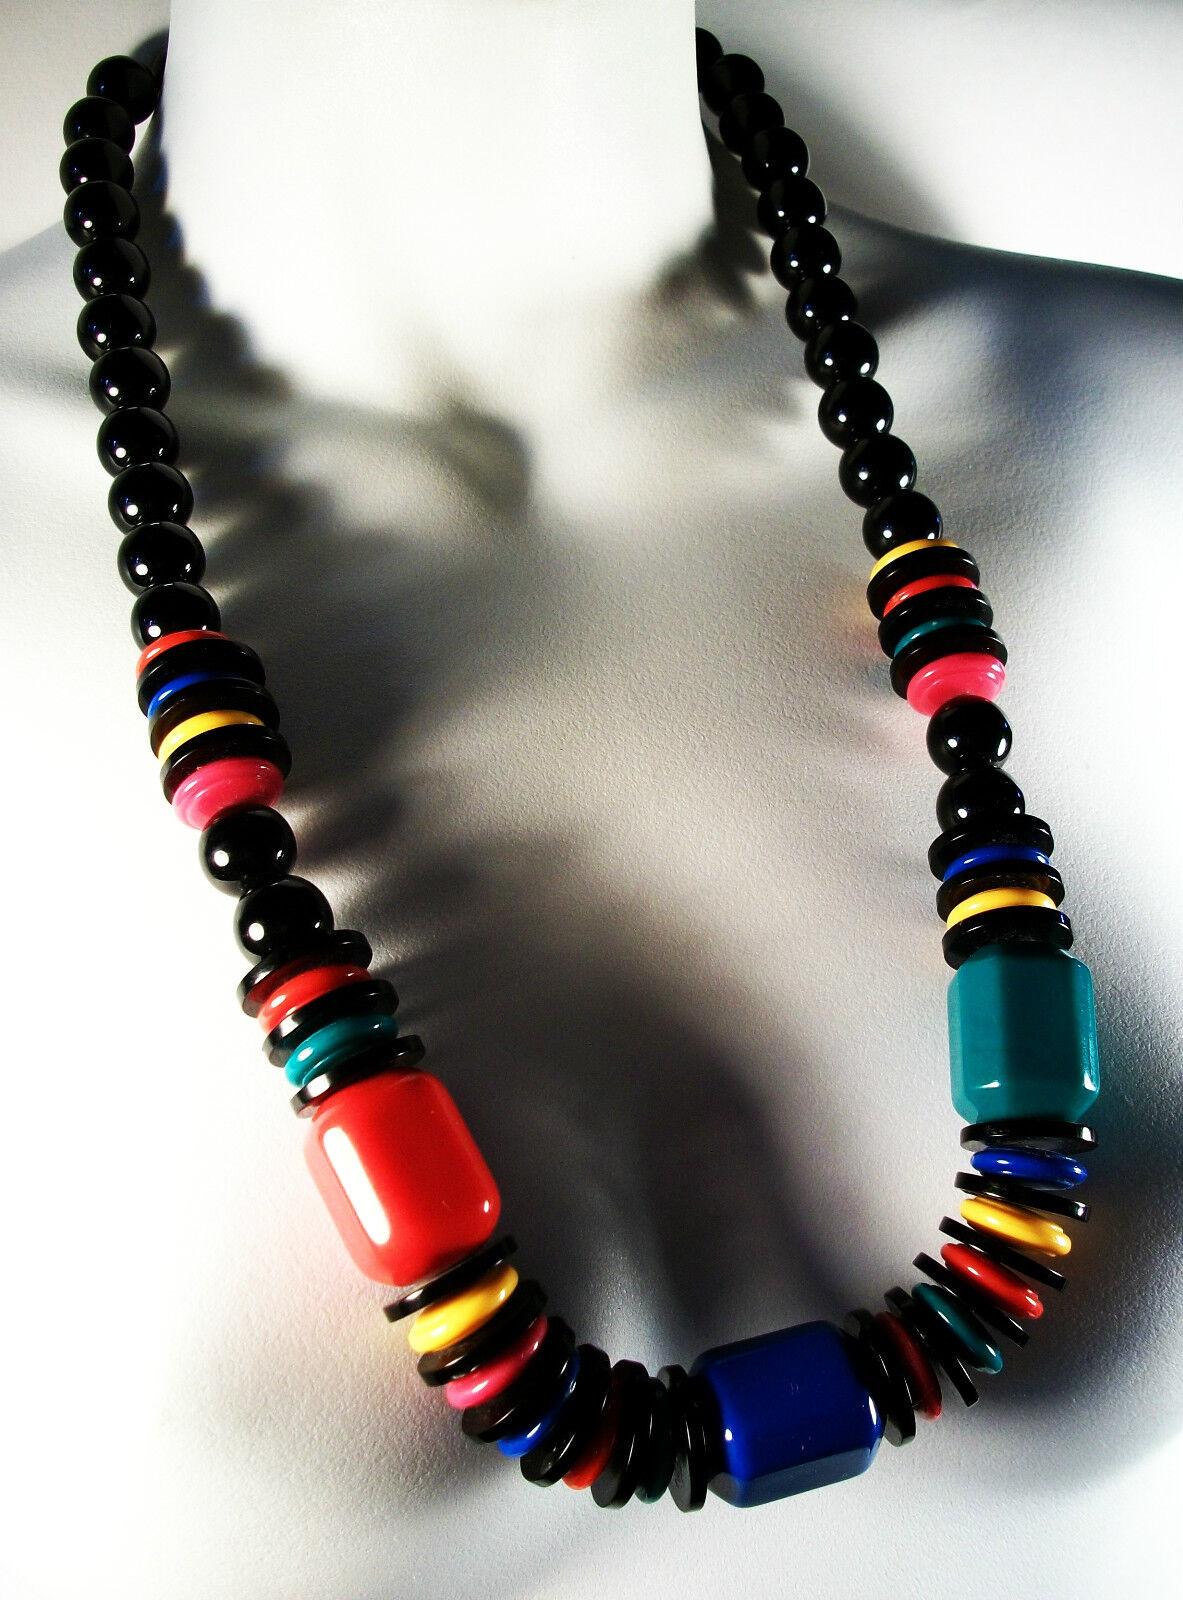 Women's Vintage Multi-color & Black Acrylic Bead Necklace - Unsigned - Circa 1980's For Sale